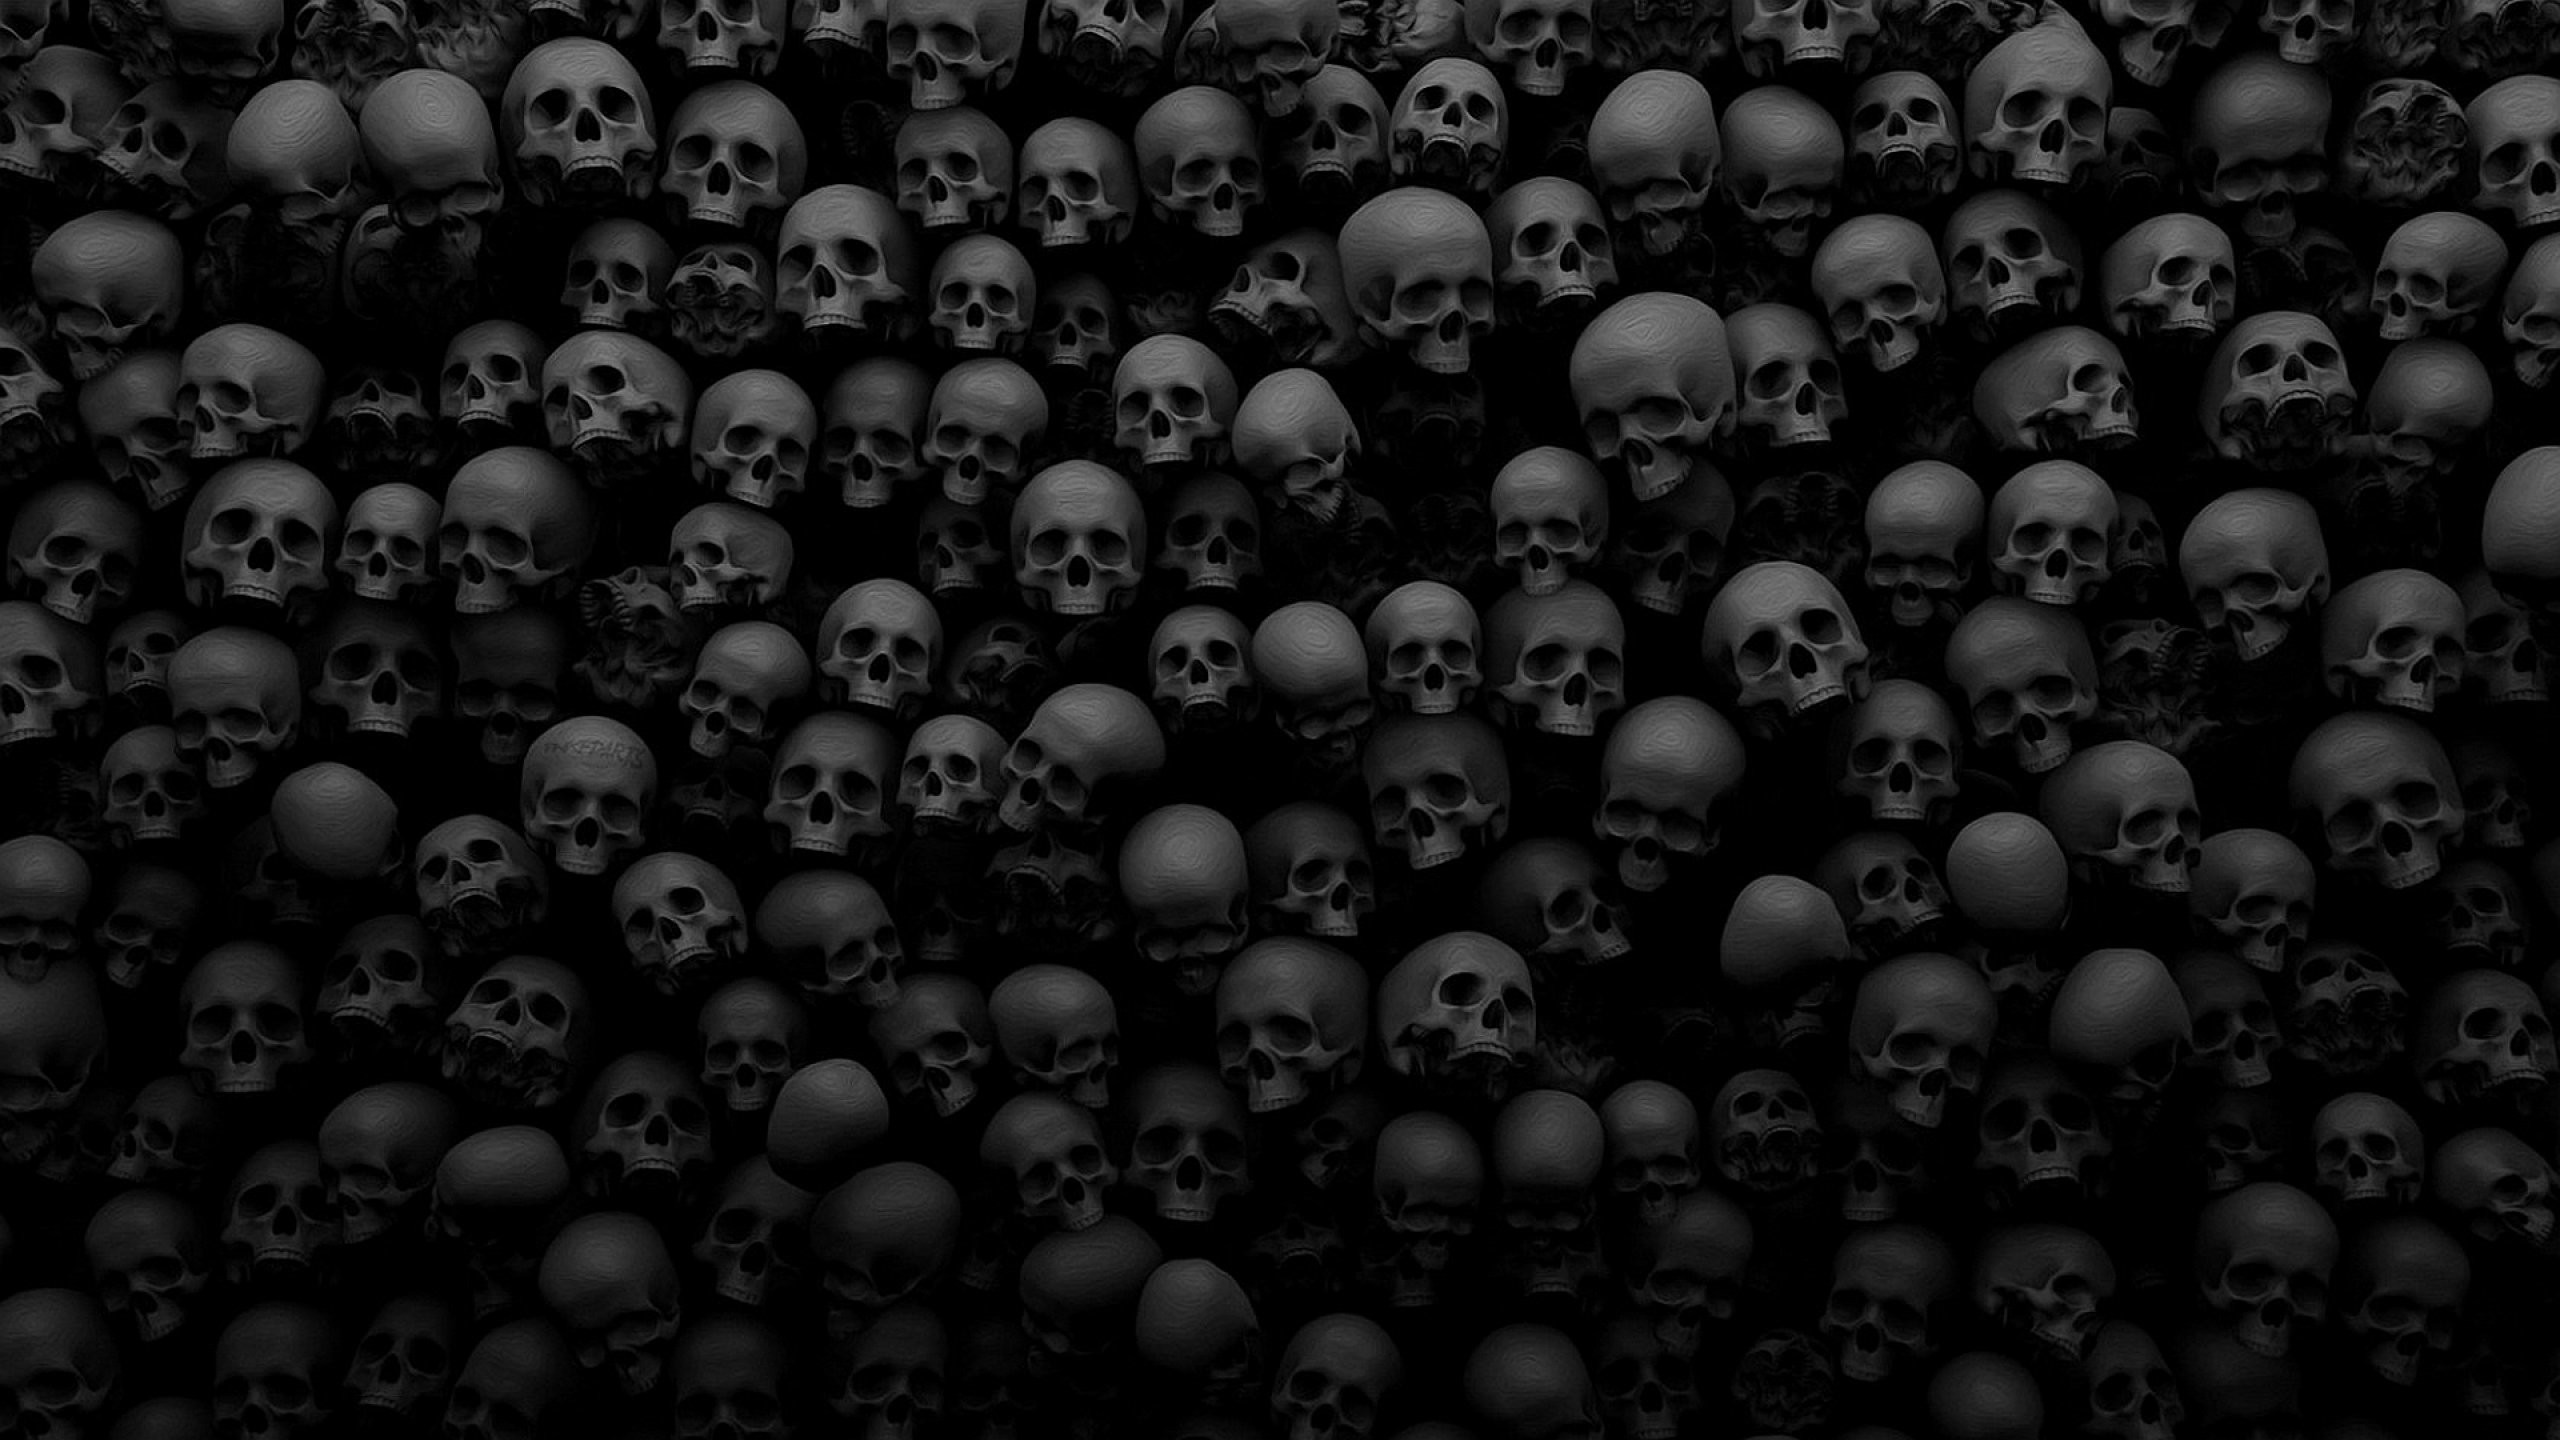 2560x1440 Scary Computer Wallpapers, Desktop Backgrounds for mobile and desktop